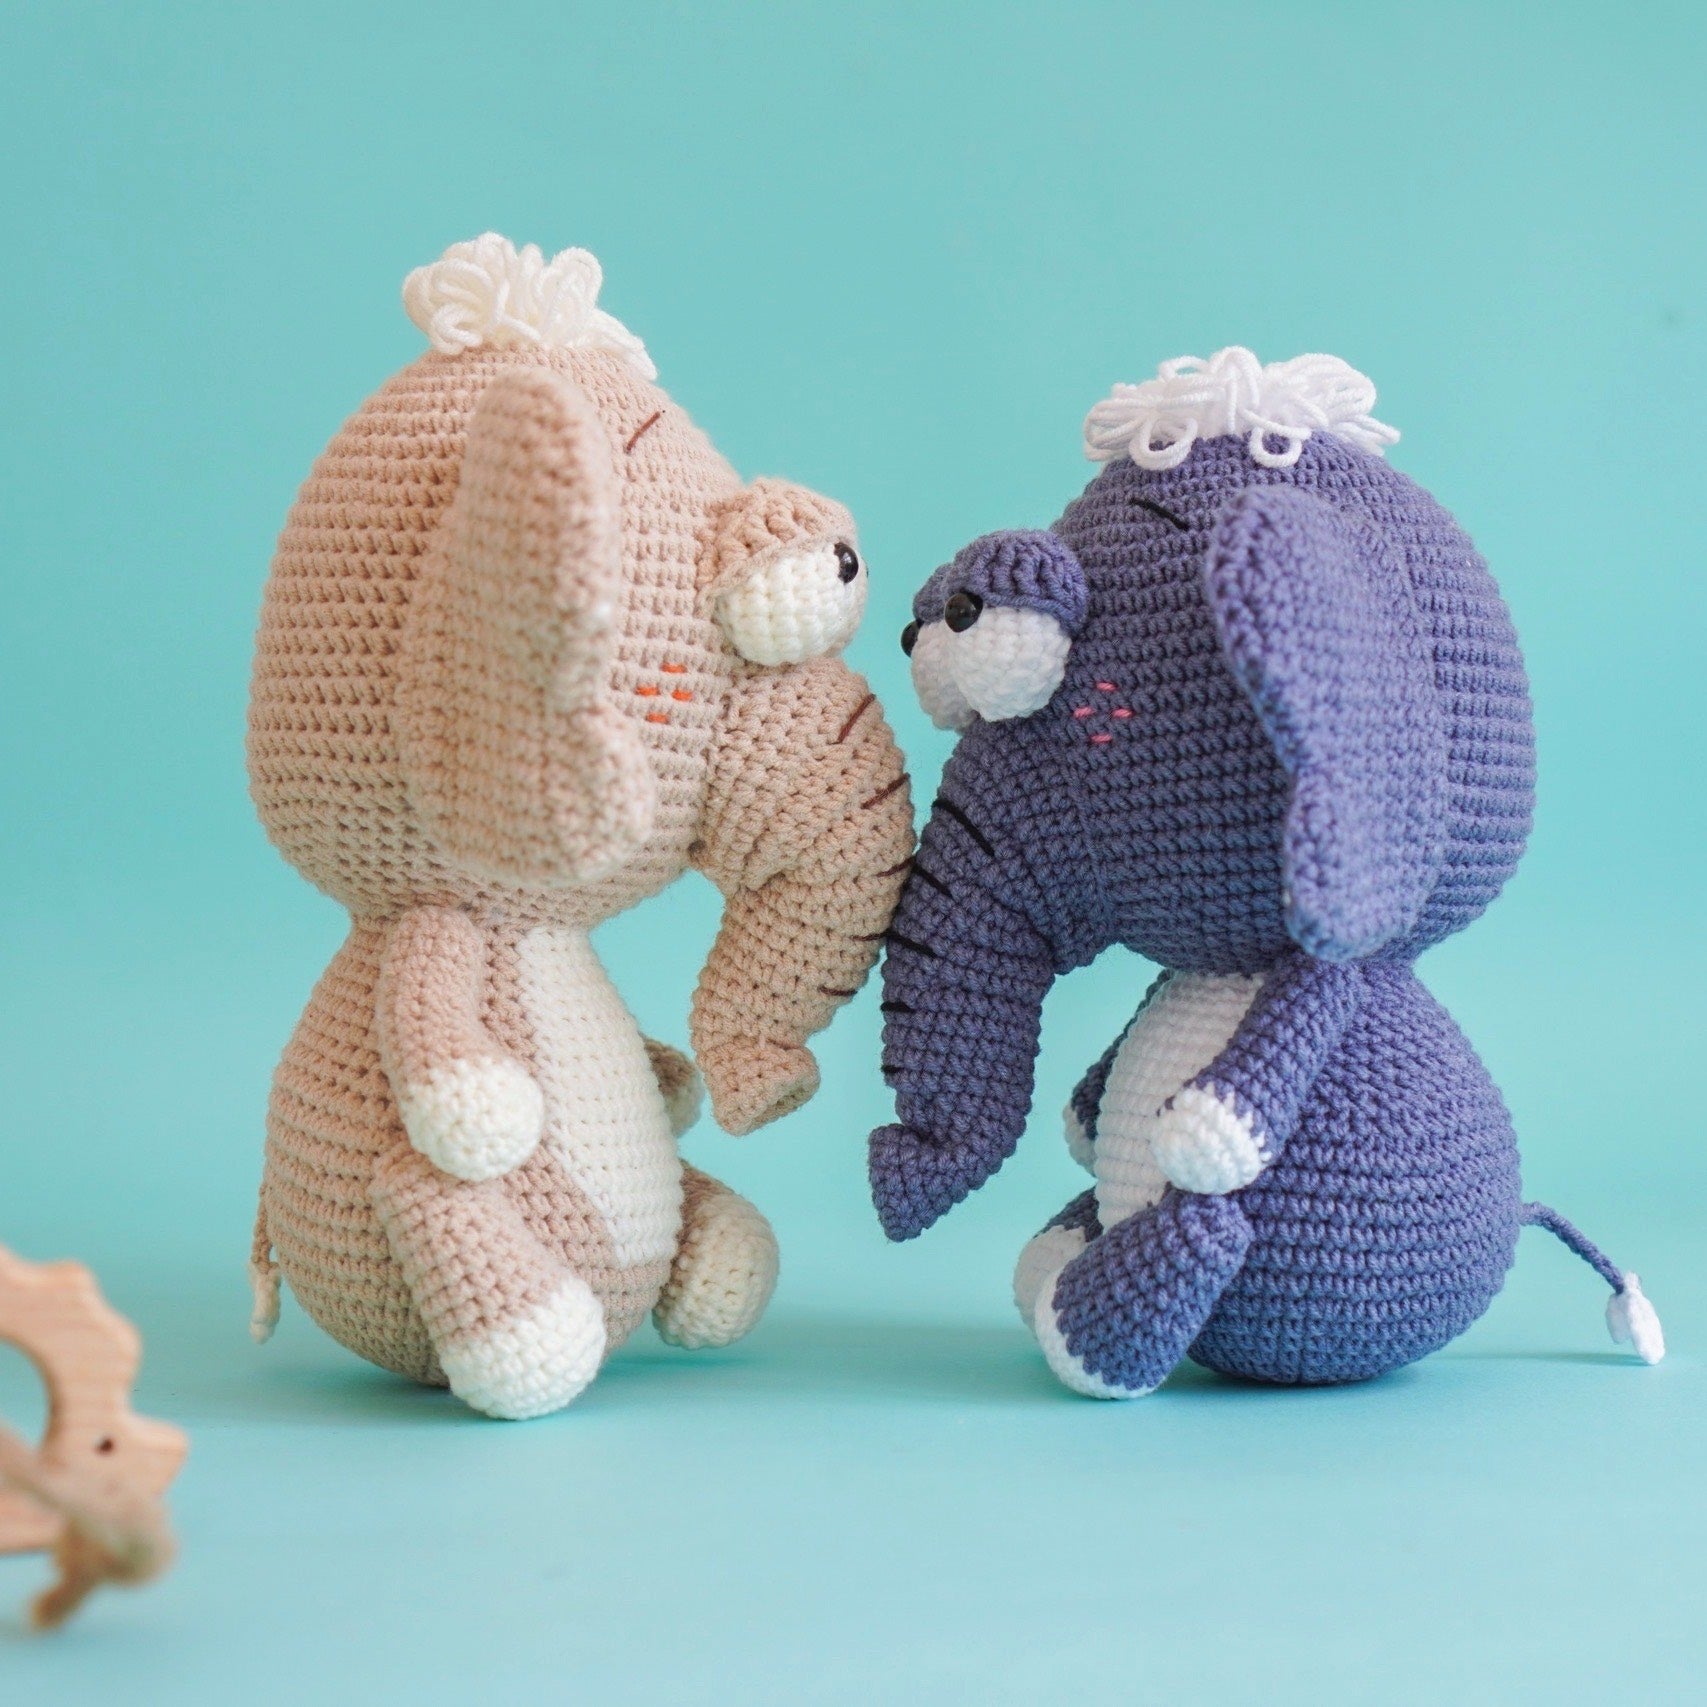 Jumbo The Elephant Crochet Pattern by Aquariwool Crochet (Crochet Doll Pattern/Amigurumi Pattern for Baby gift)